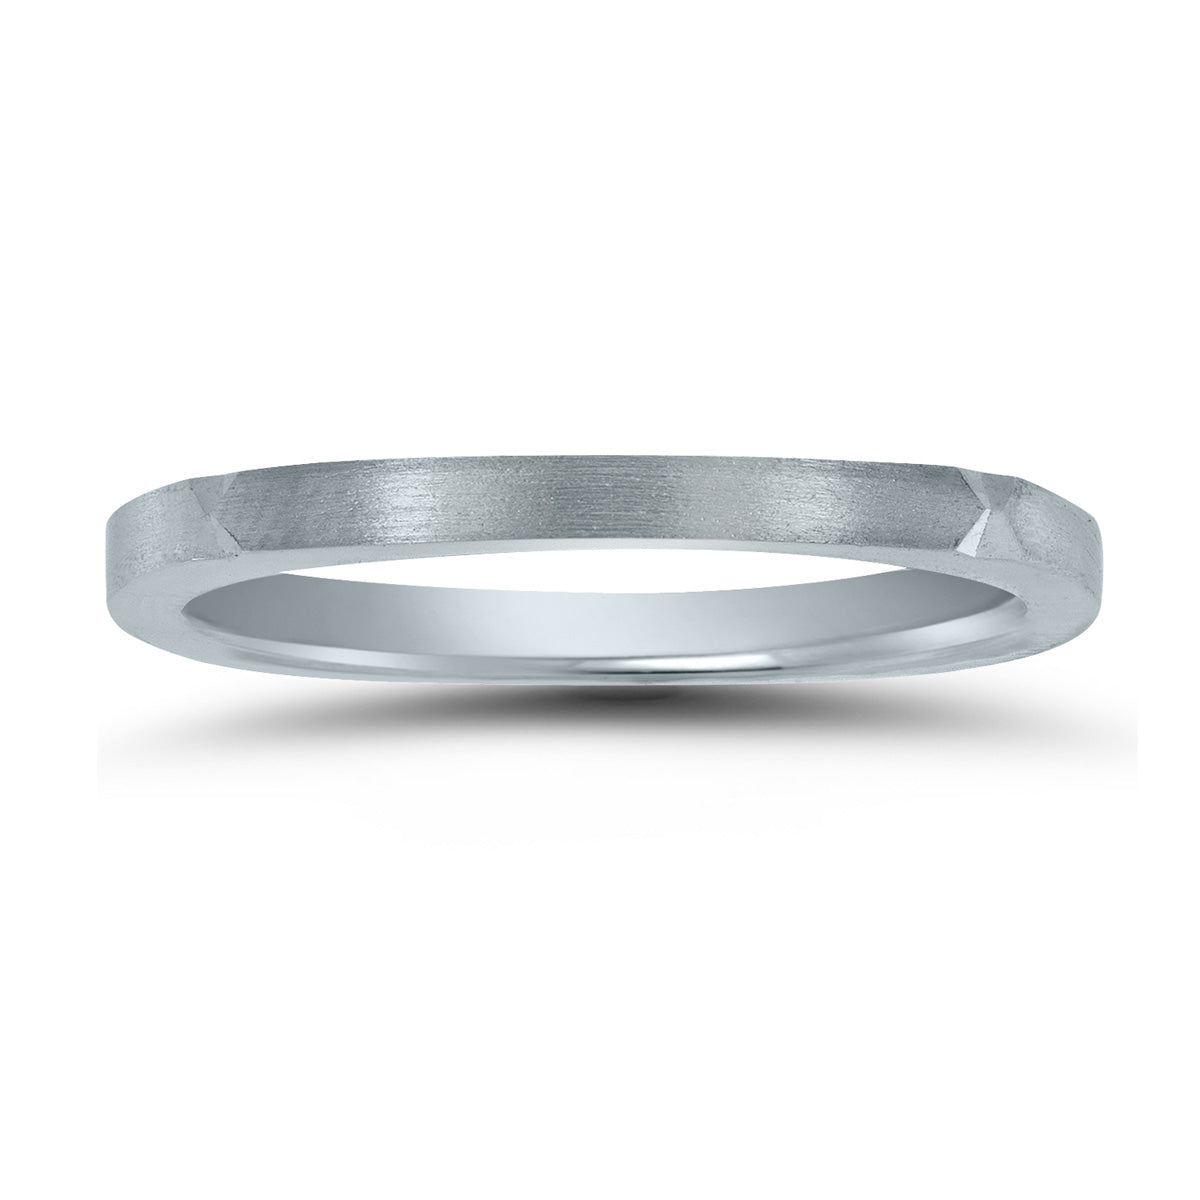 Sselects Thin 1.5mm Four Sided Wedding Band With Matte Finish In 14k White Gold In Metallic